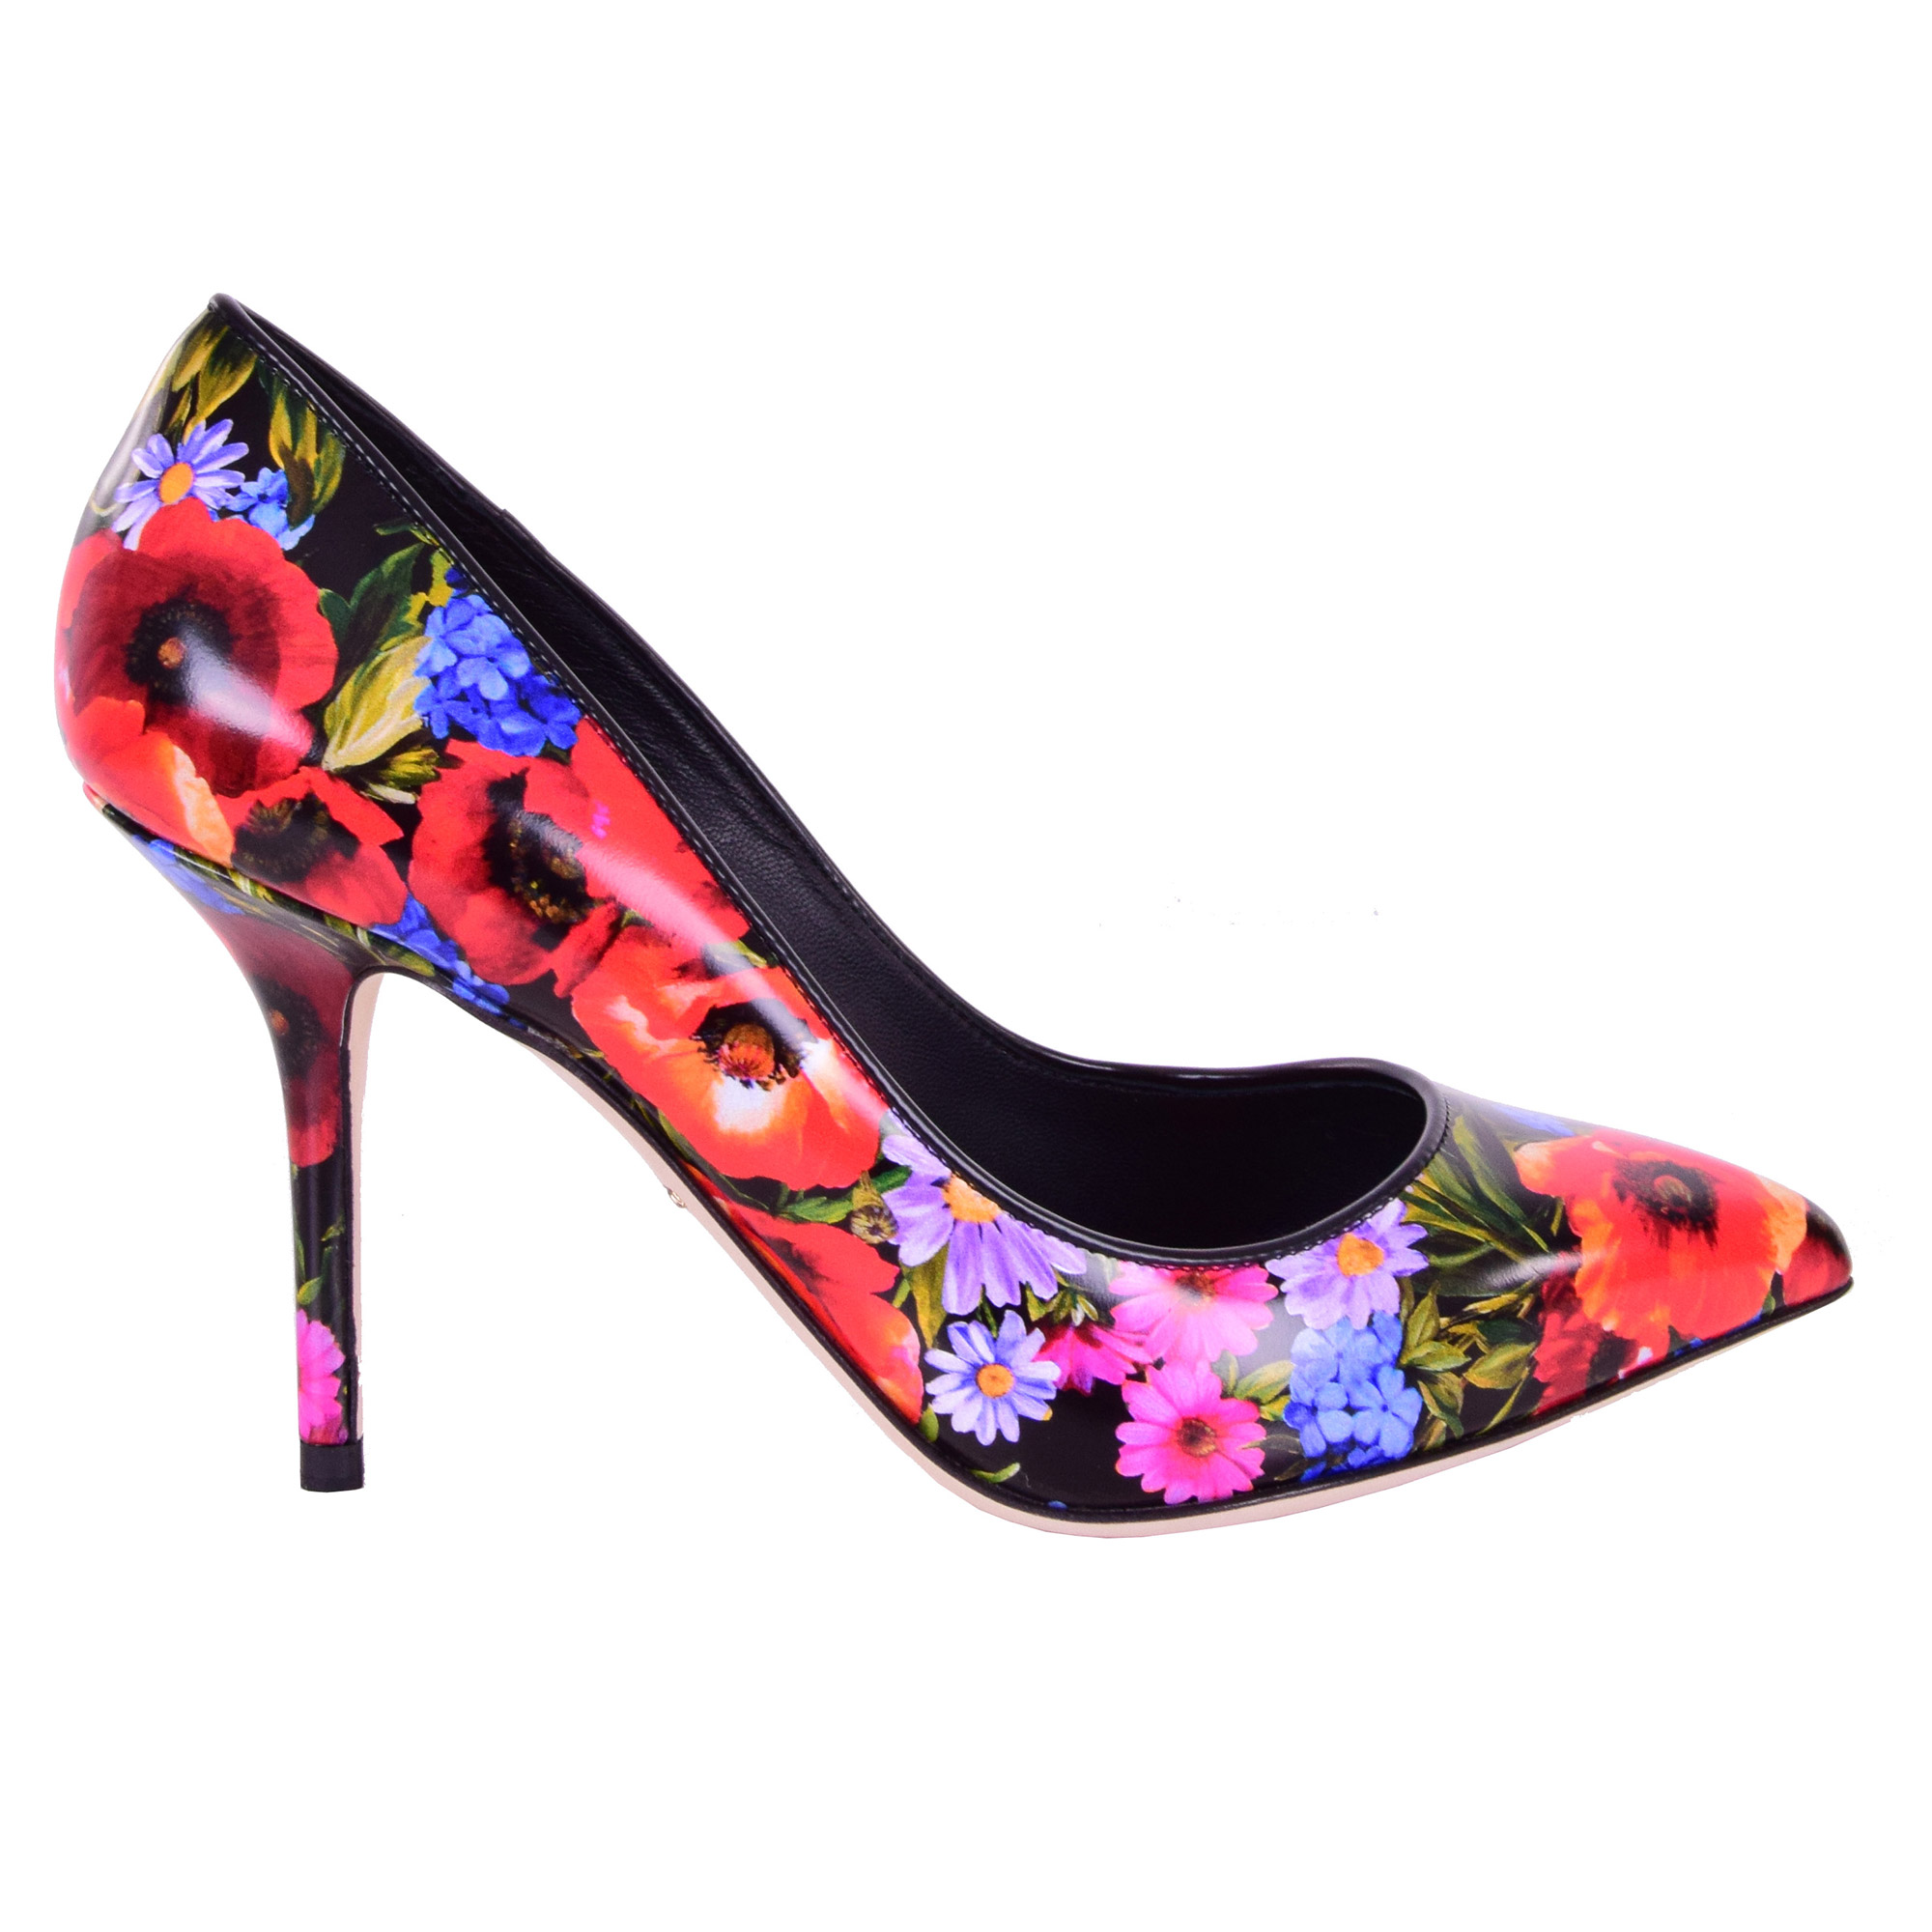 Dolce & Gabbana Floral Printed Pumps BELLUCCI Black Red  | FASHION ROOMS